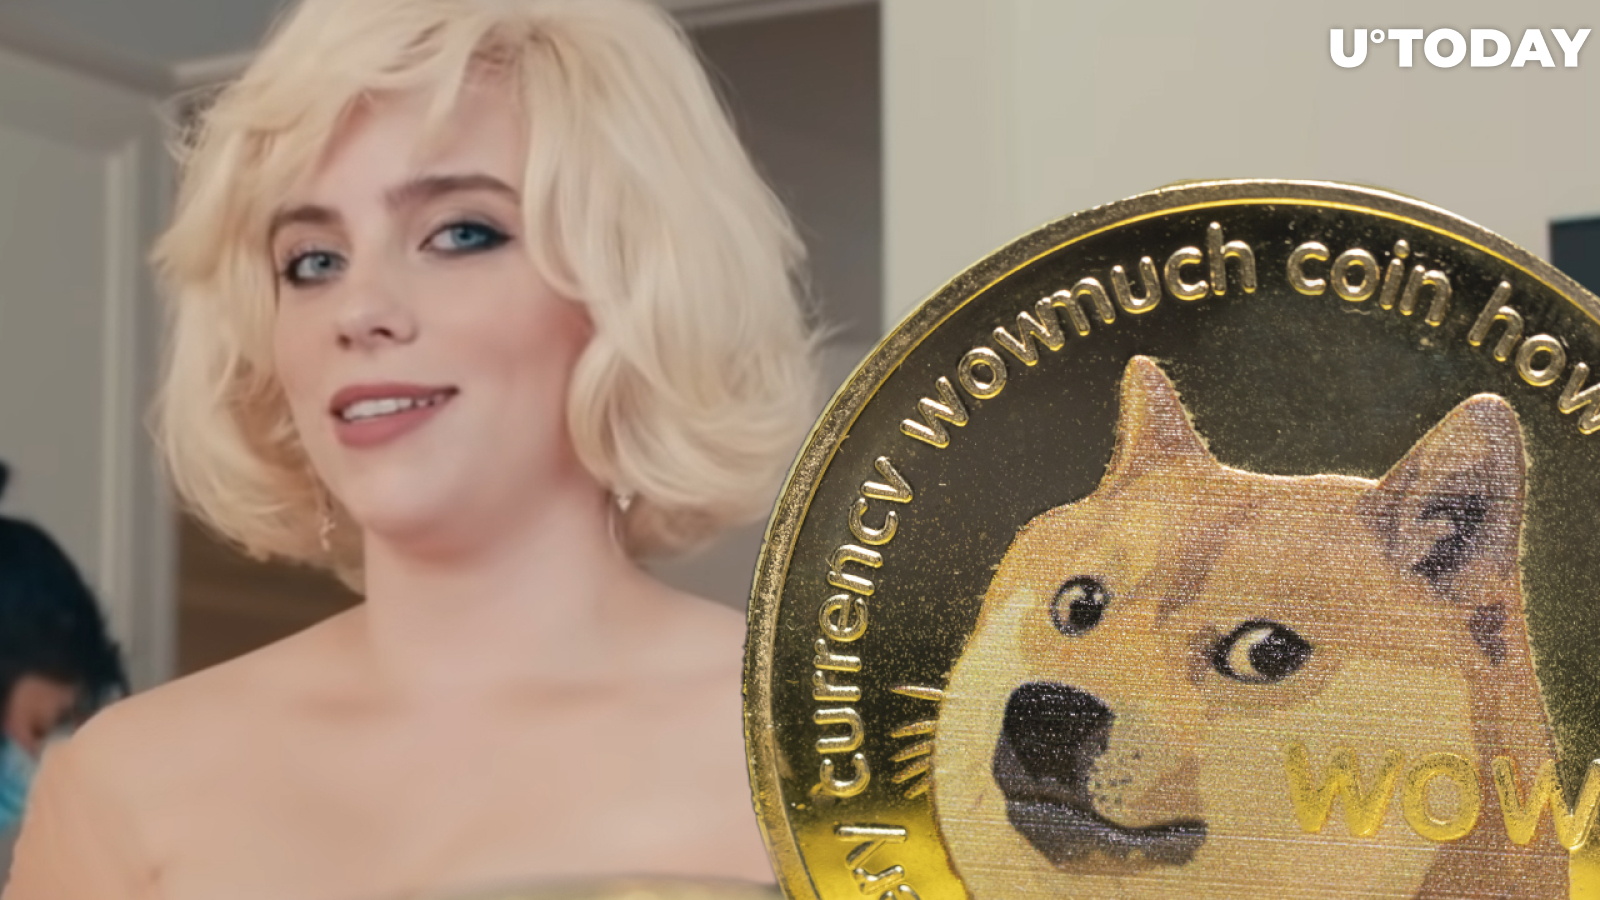 Here's What Dogecoin and Billie Eilish Have in Common